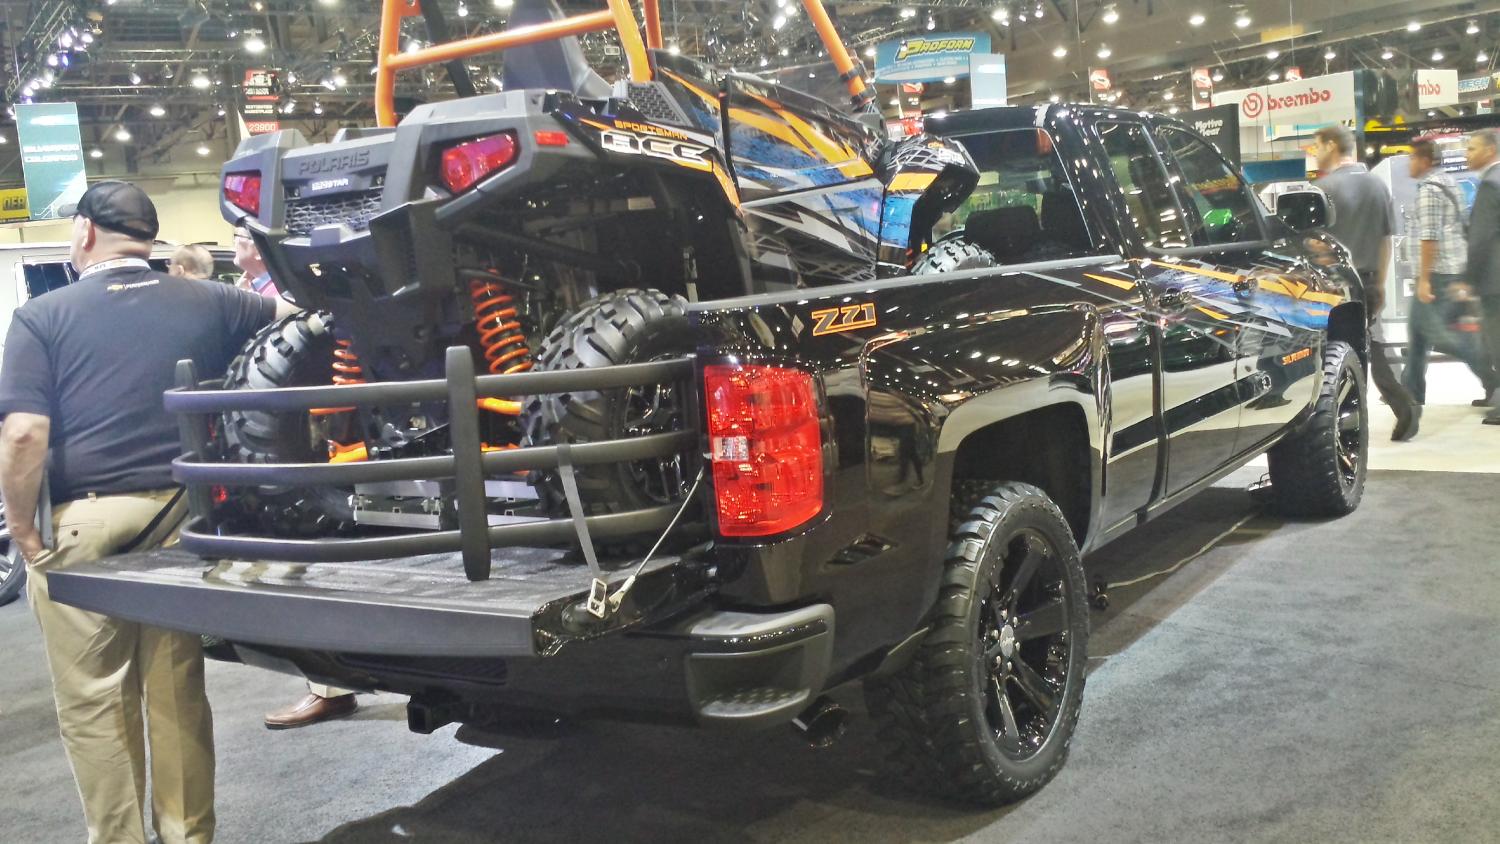 More information about "GM-Trucks.com is LIVE From SEMA - November 3rd/4th"